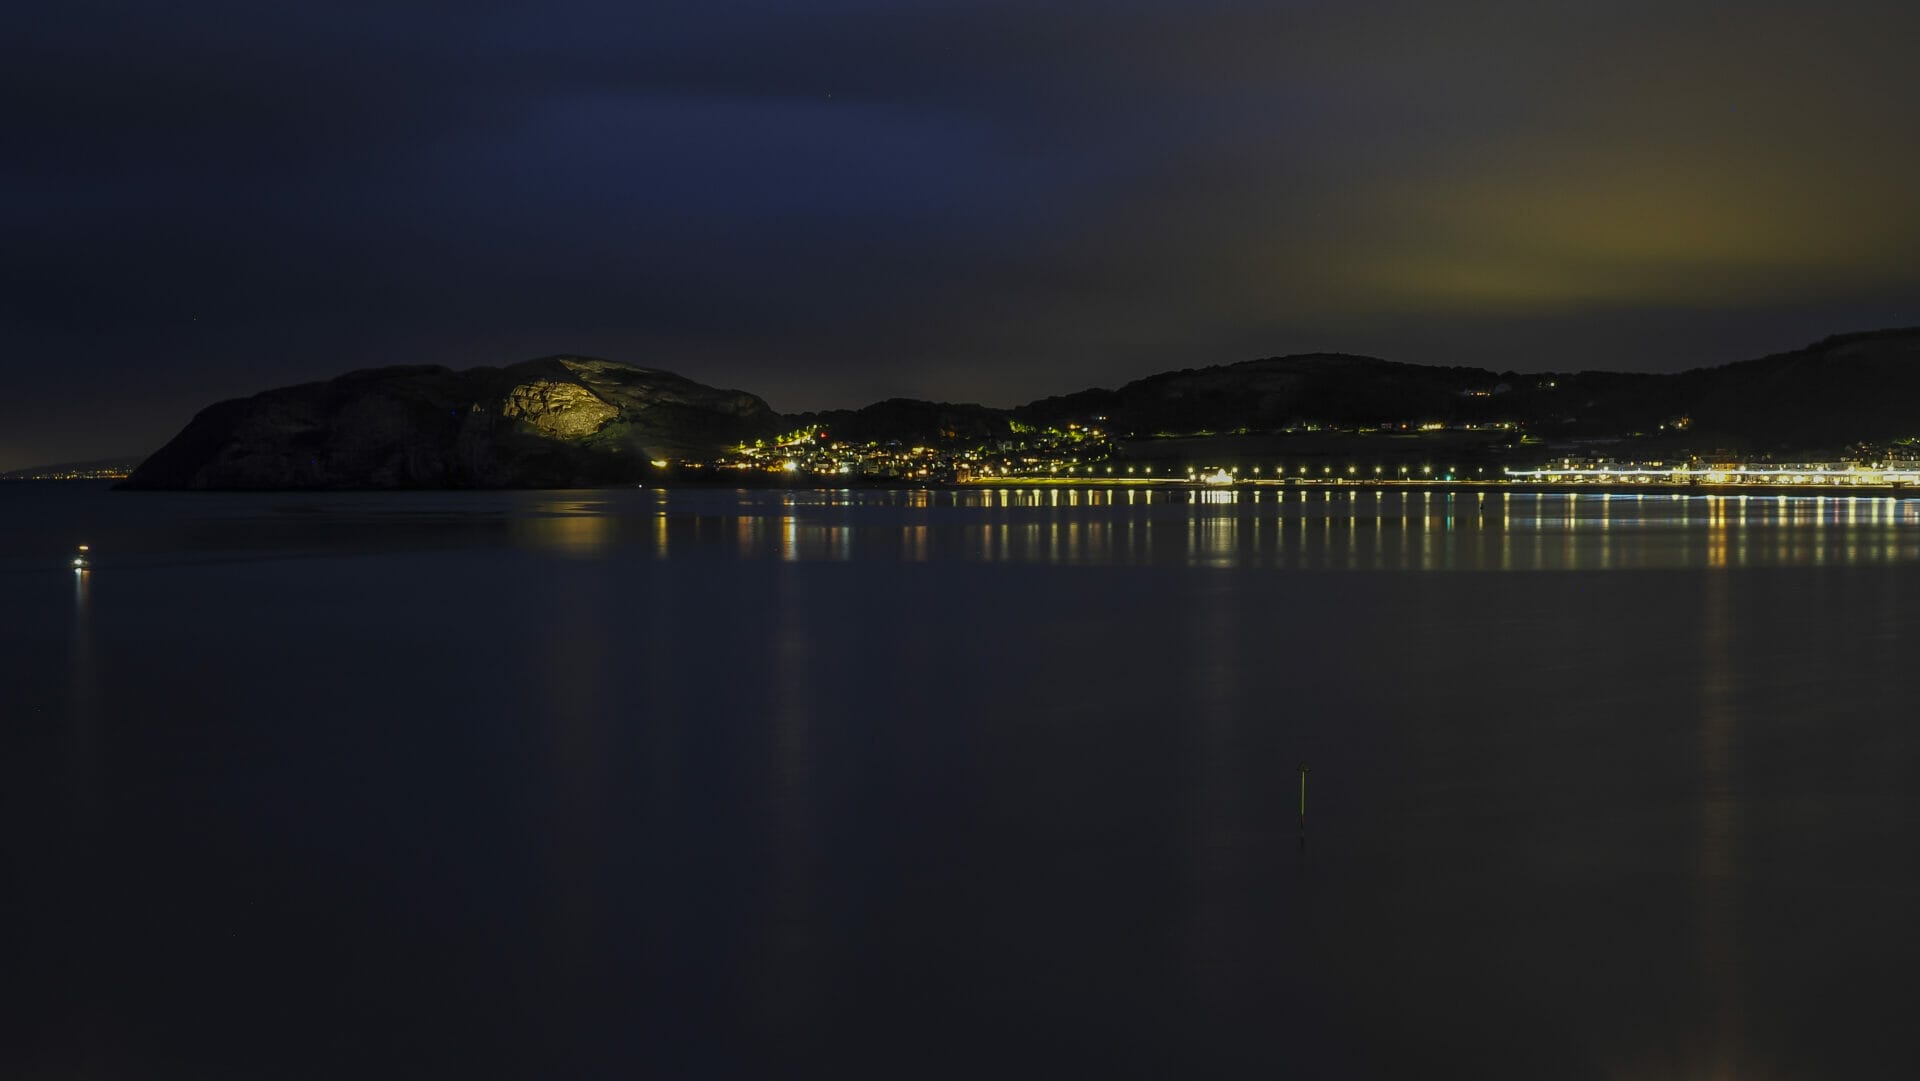 Llandudno Prom taken in Low-Light Conditions by Eifion Williams - Welshot Photographic Academy